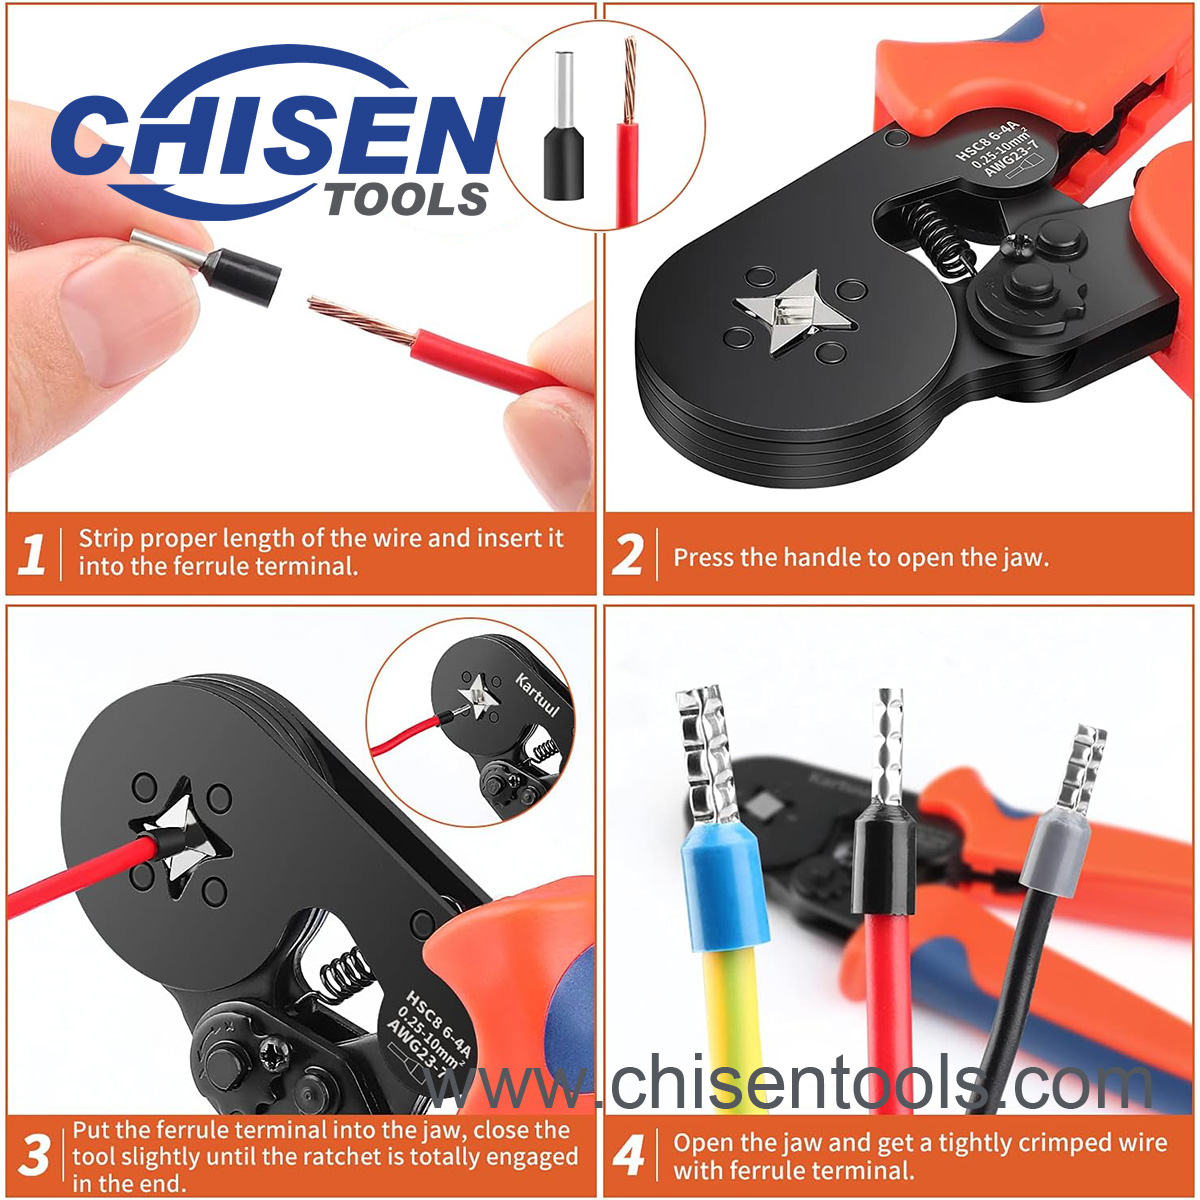 How to Use Self-adjusting Square Wire Crimper